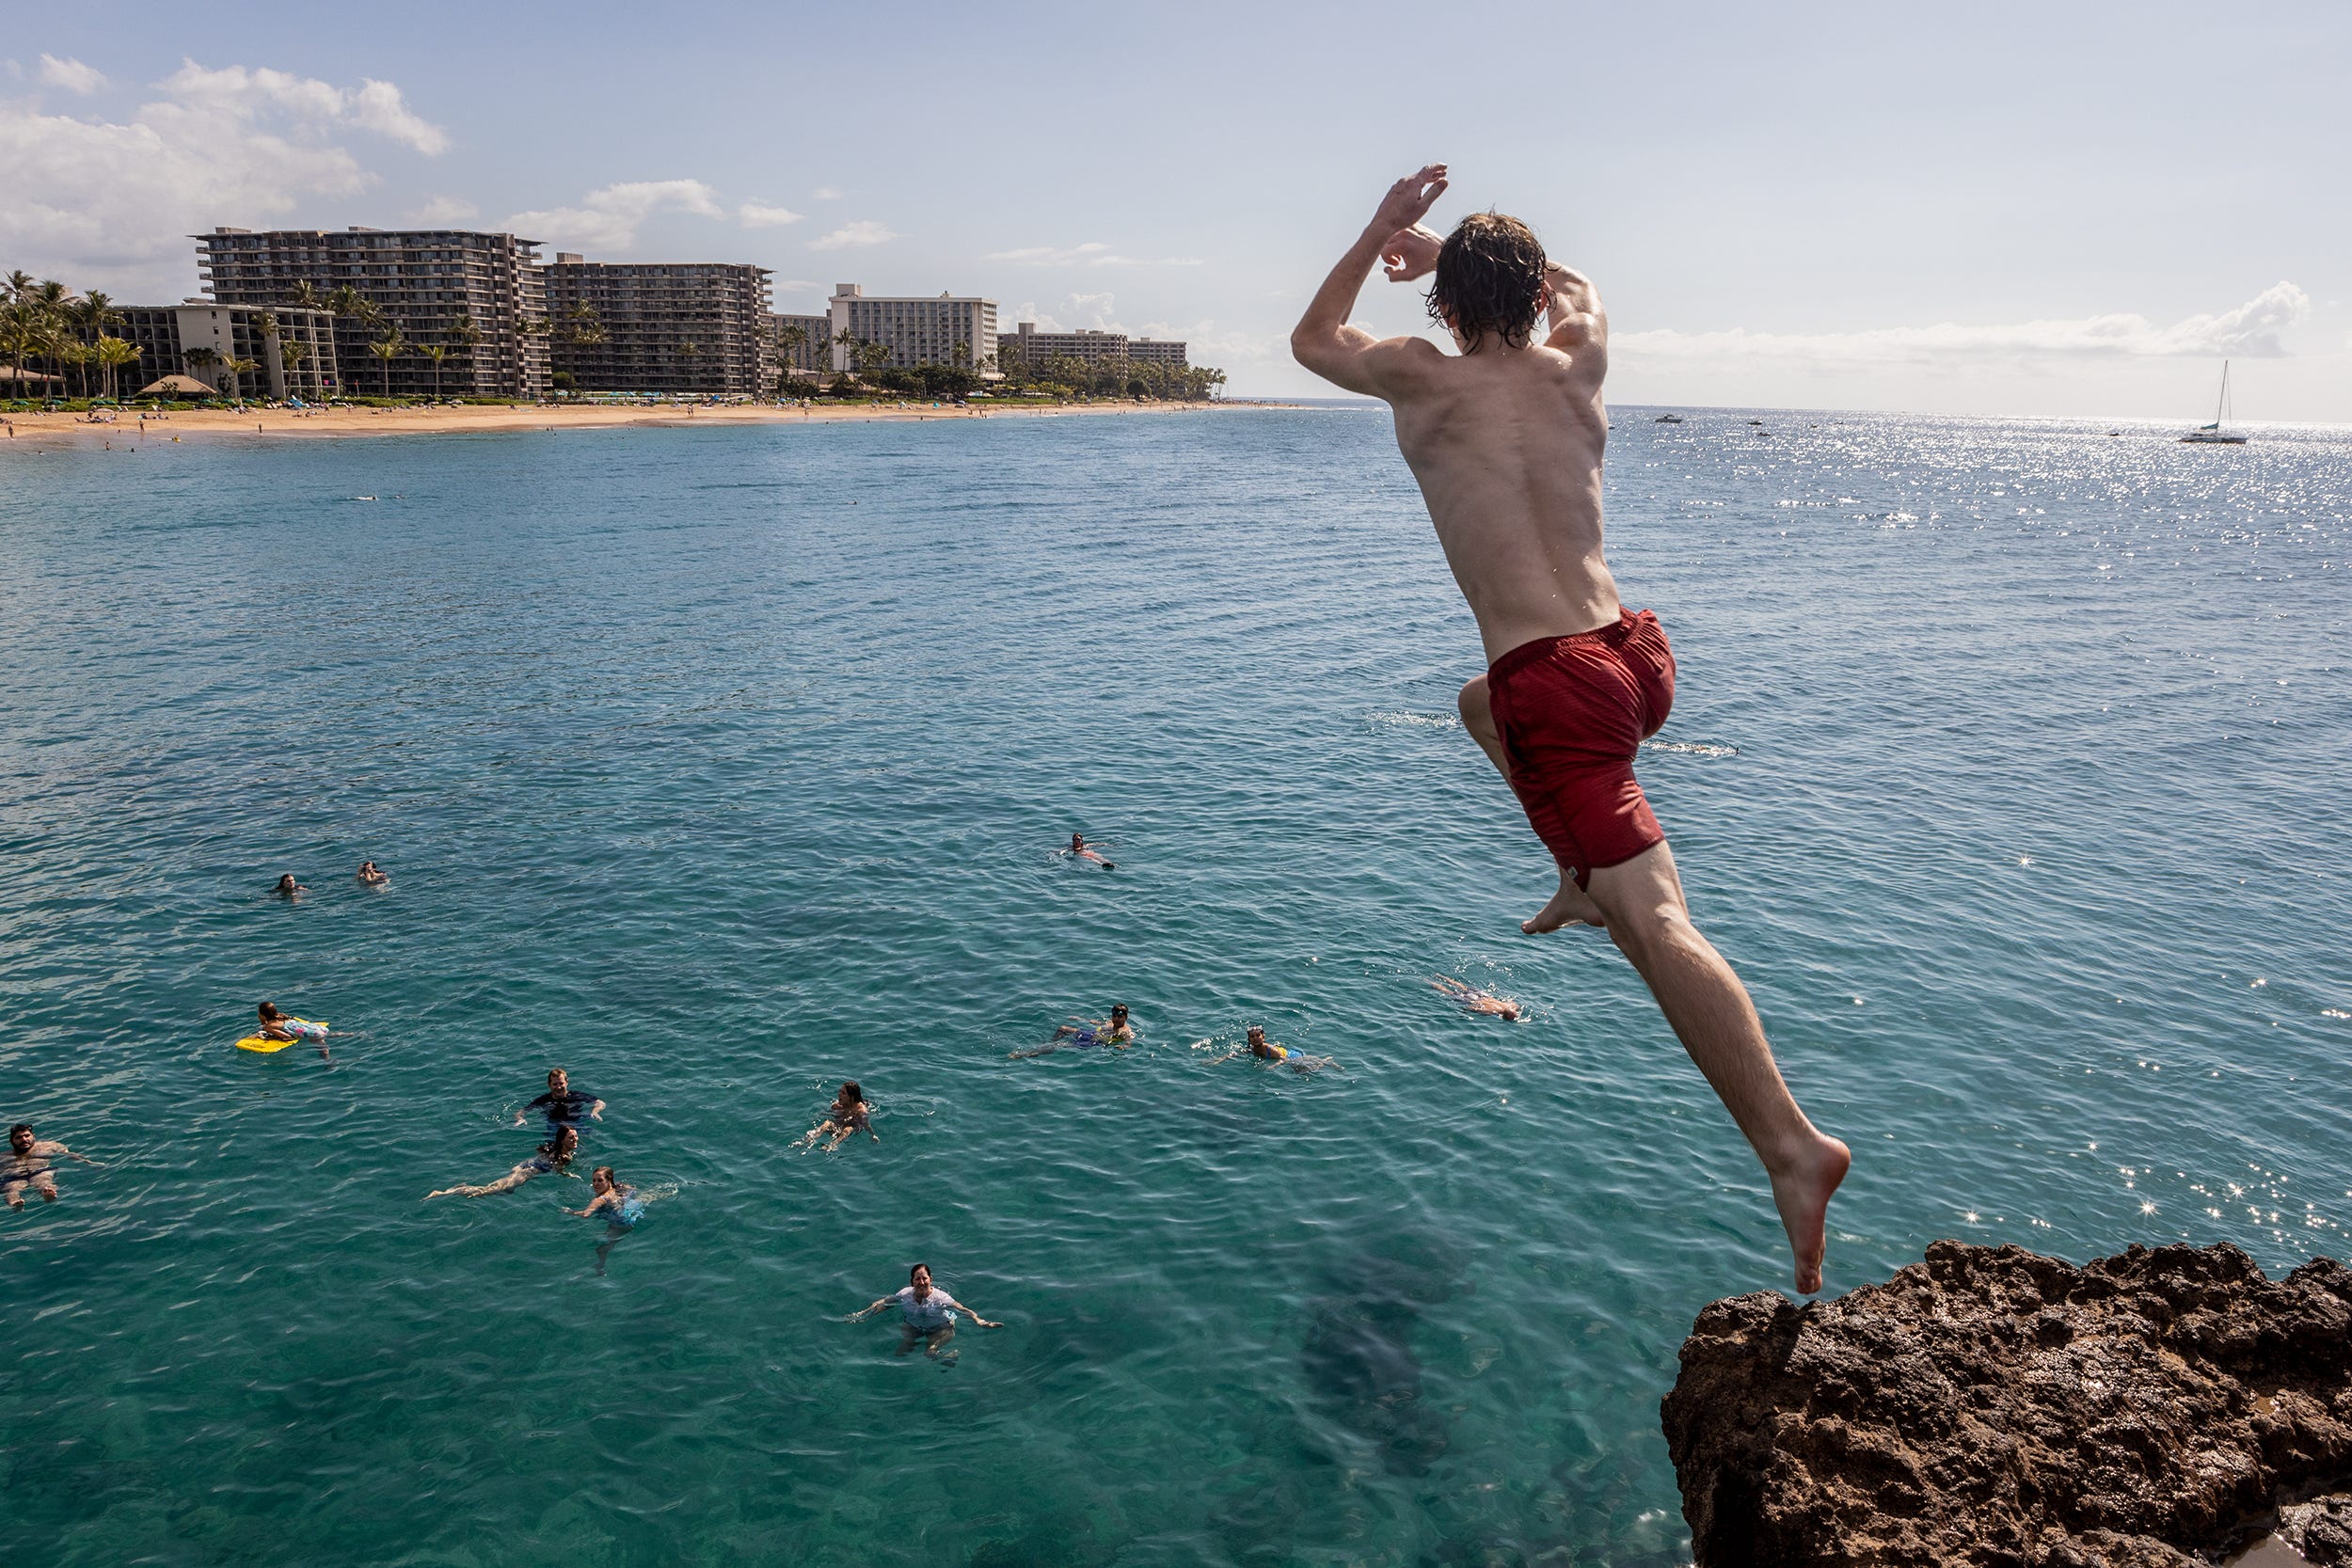 A man jumping off a rock into the ocean.